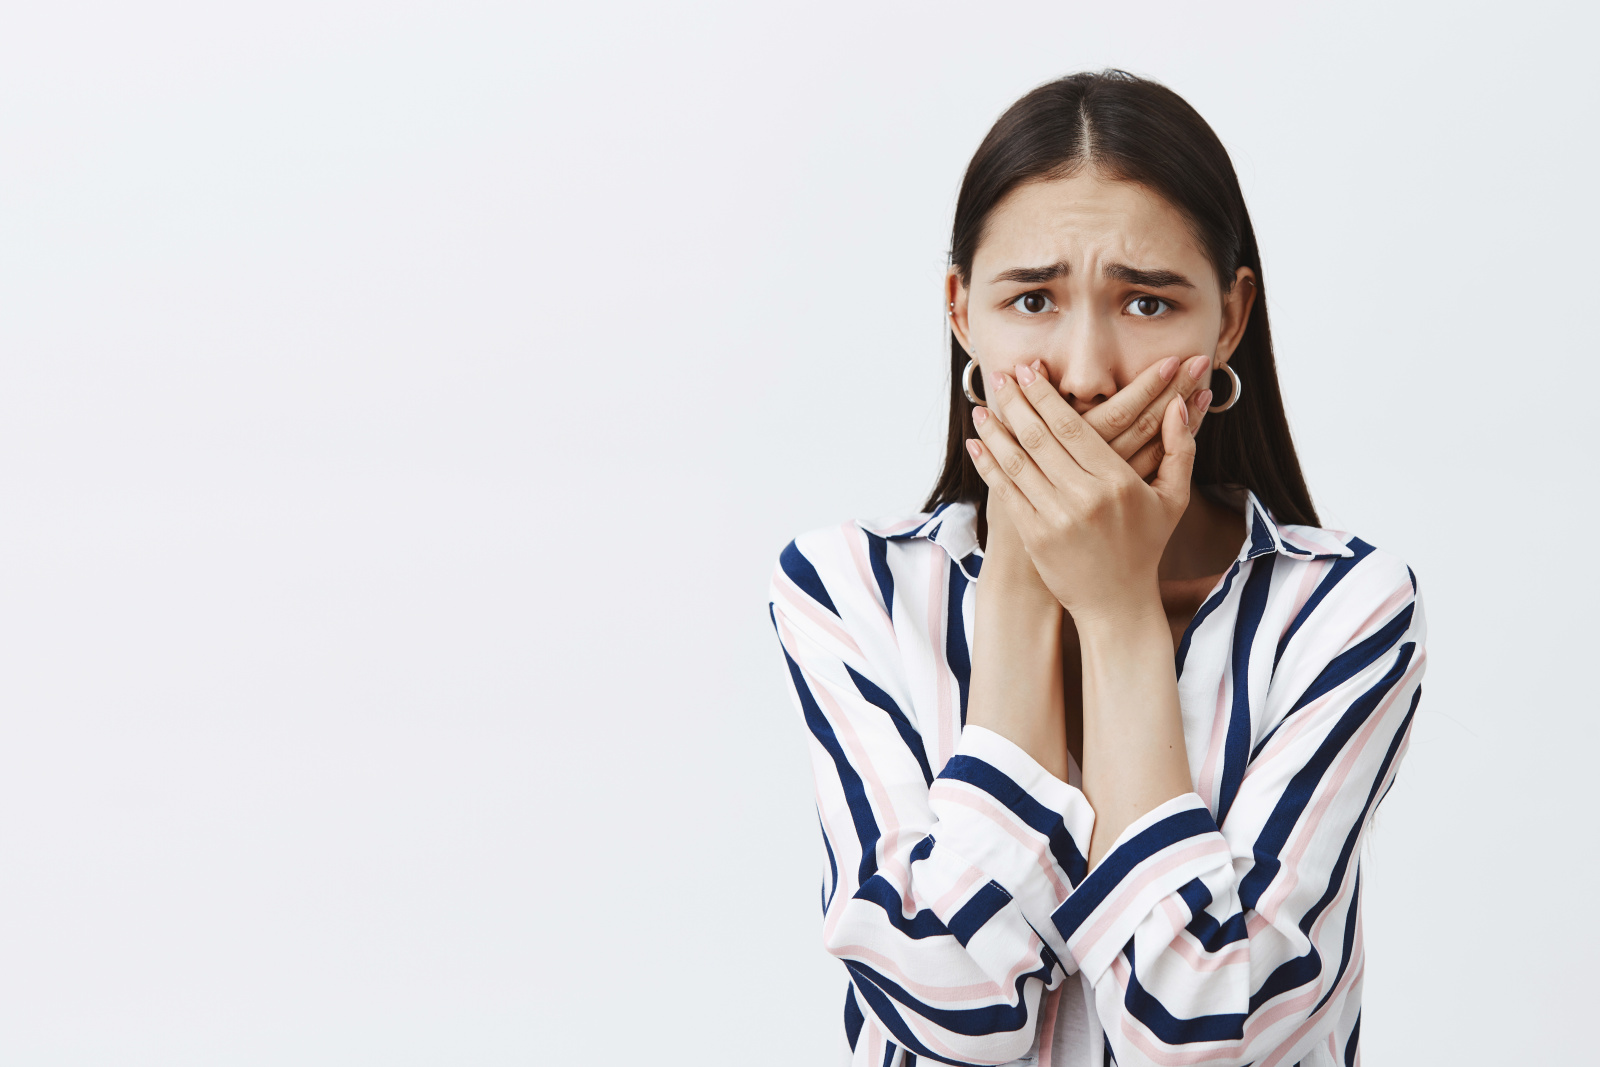 woman-being-harassed-afraid-tell-anyone-scared-anxious-woman-striped-blouse-trendy-earrings-covering-mouth-with-palms-scream-frowning-being-afraid-gray-wall.jpg